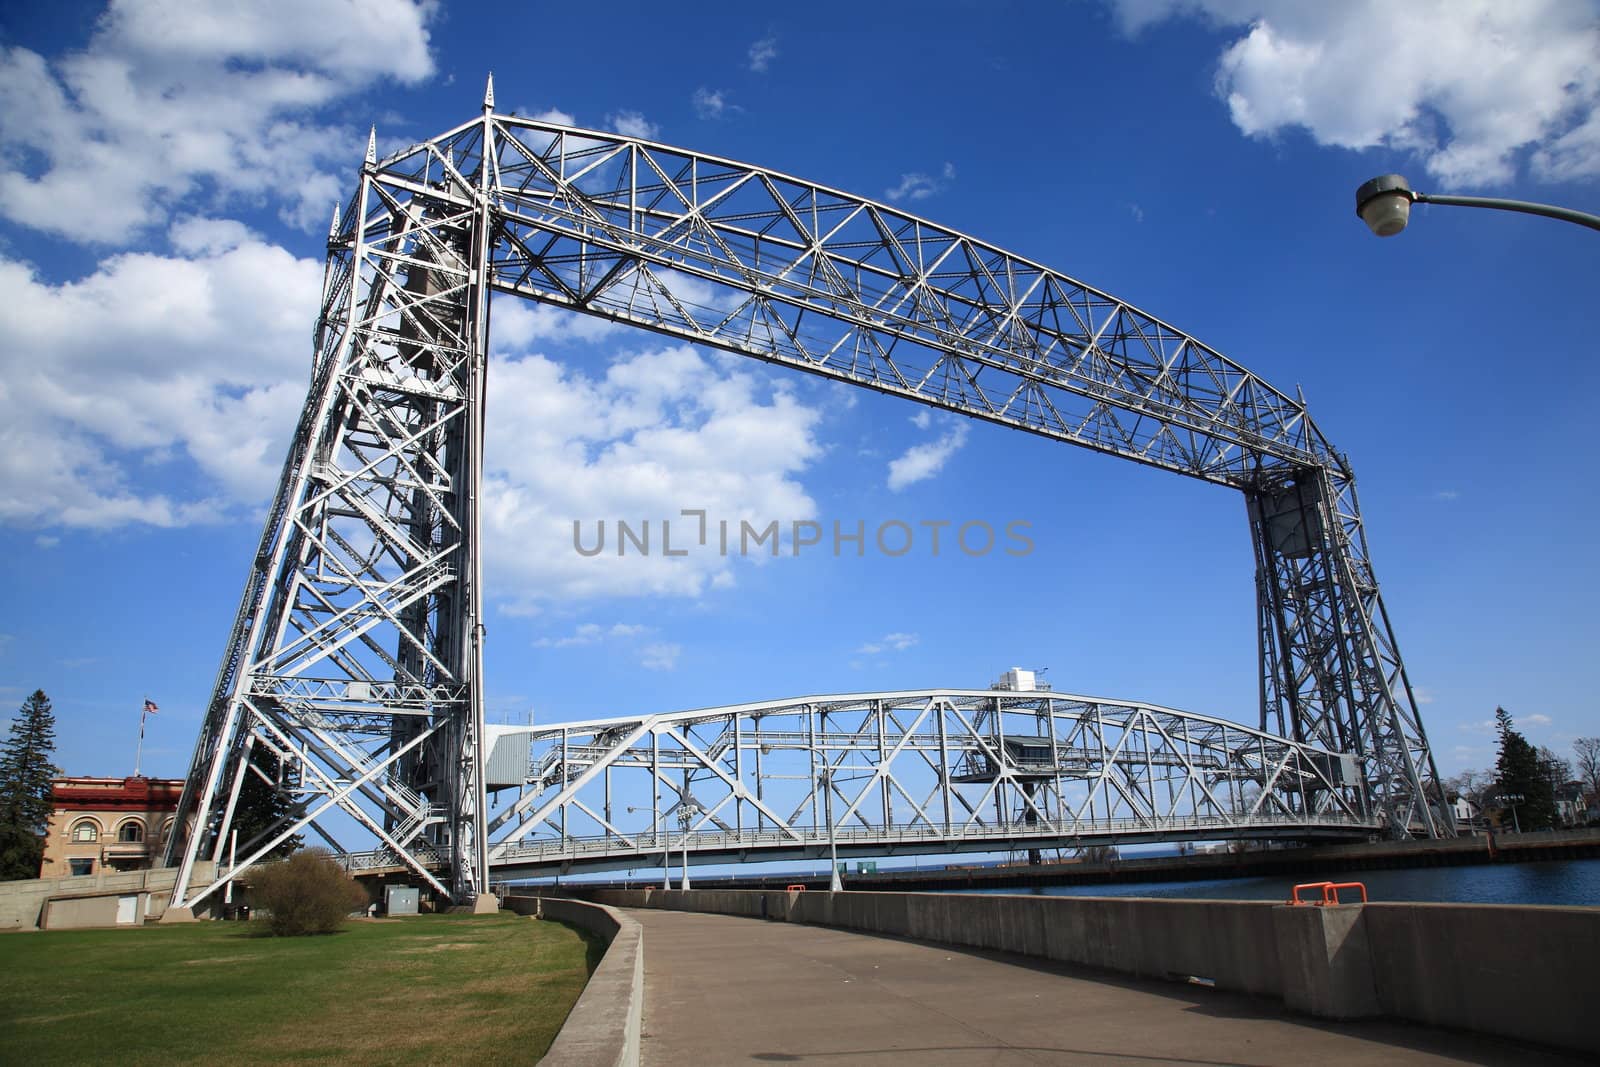 Aerial Lift Bridge - Duluth by Ffooter